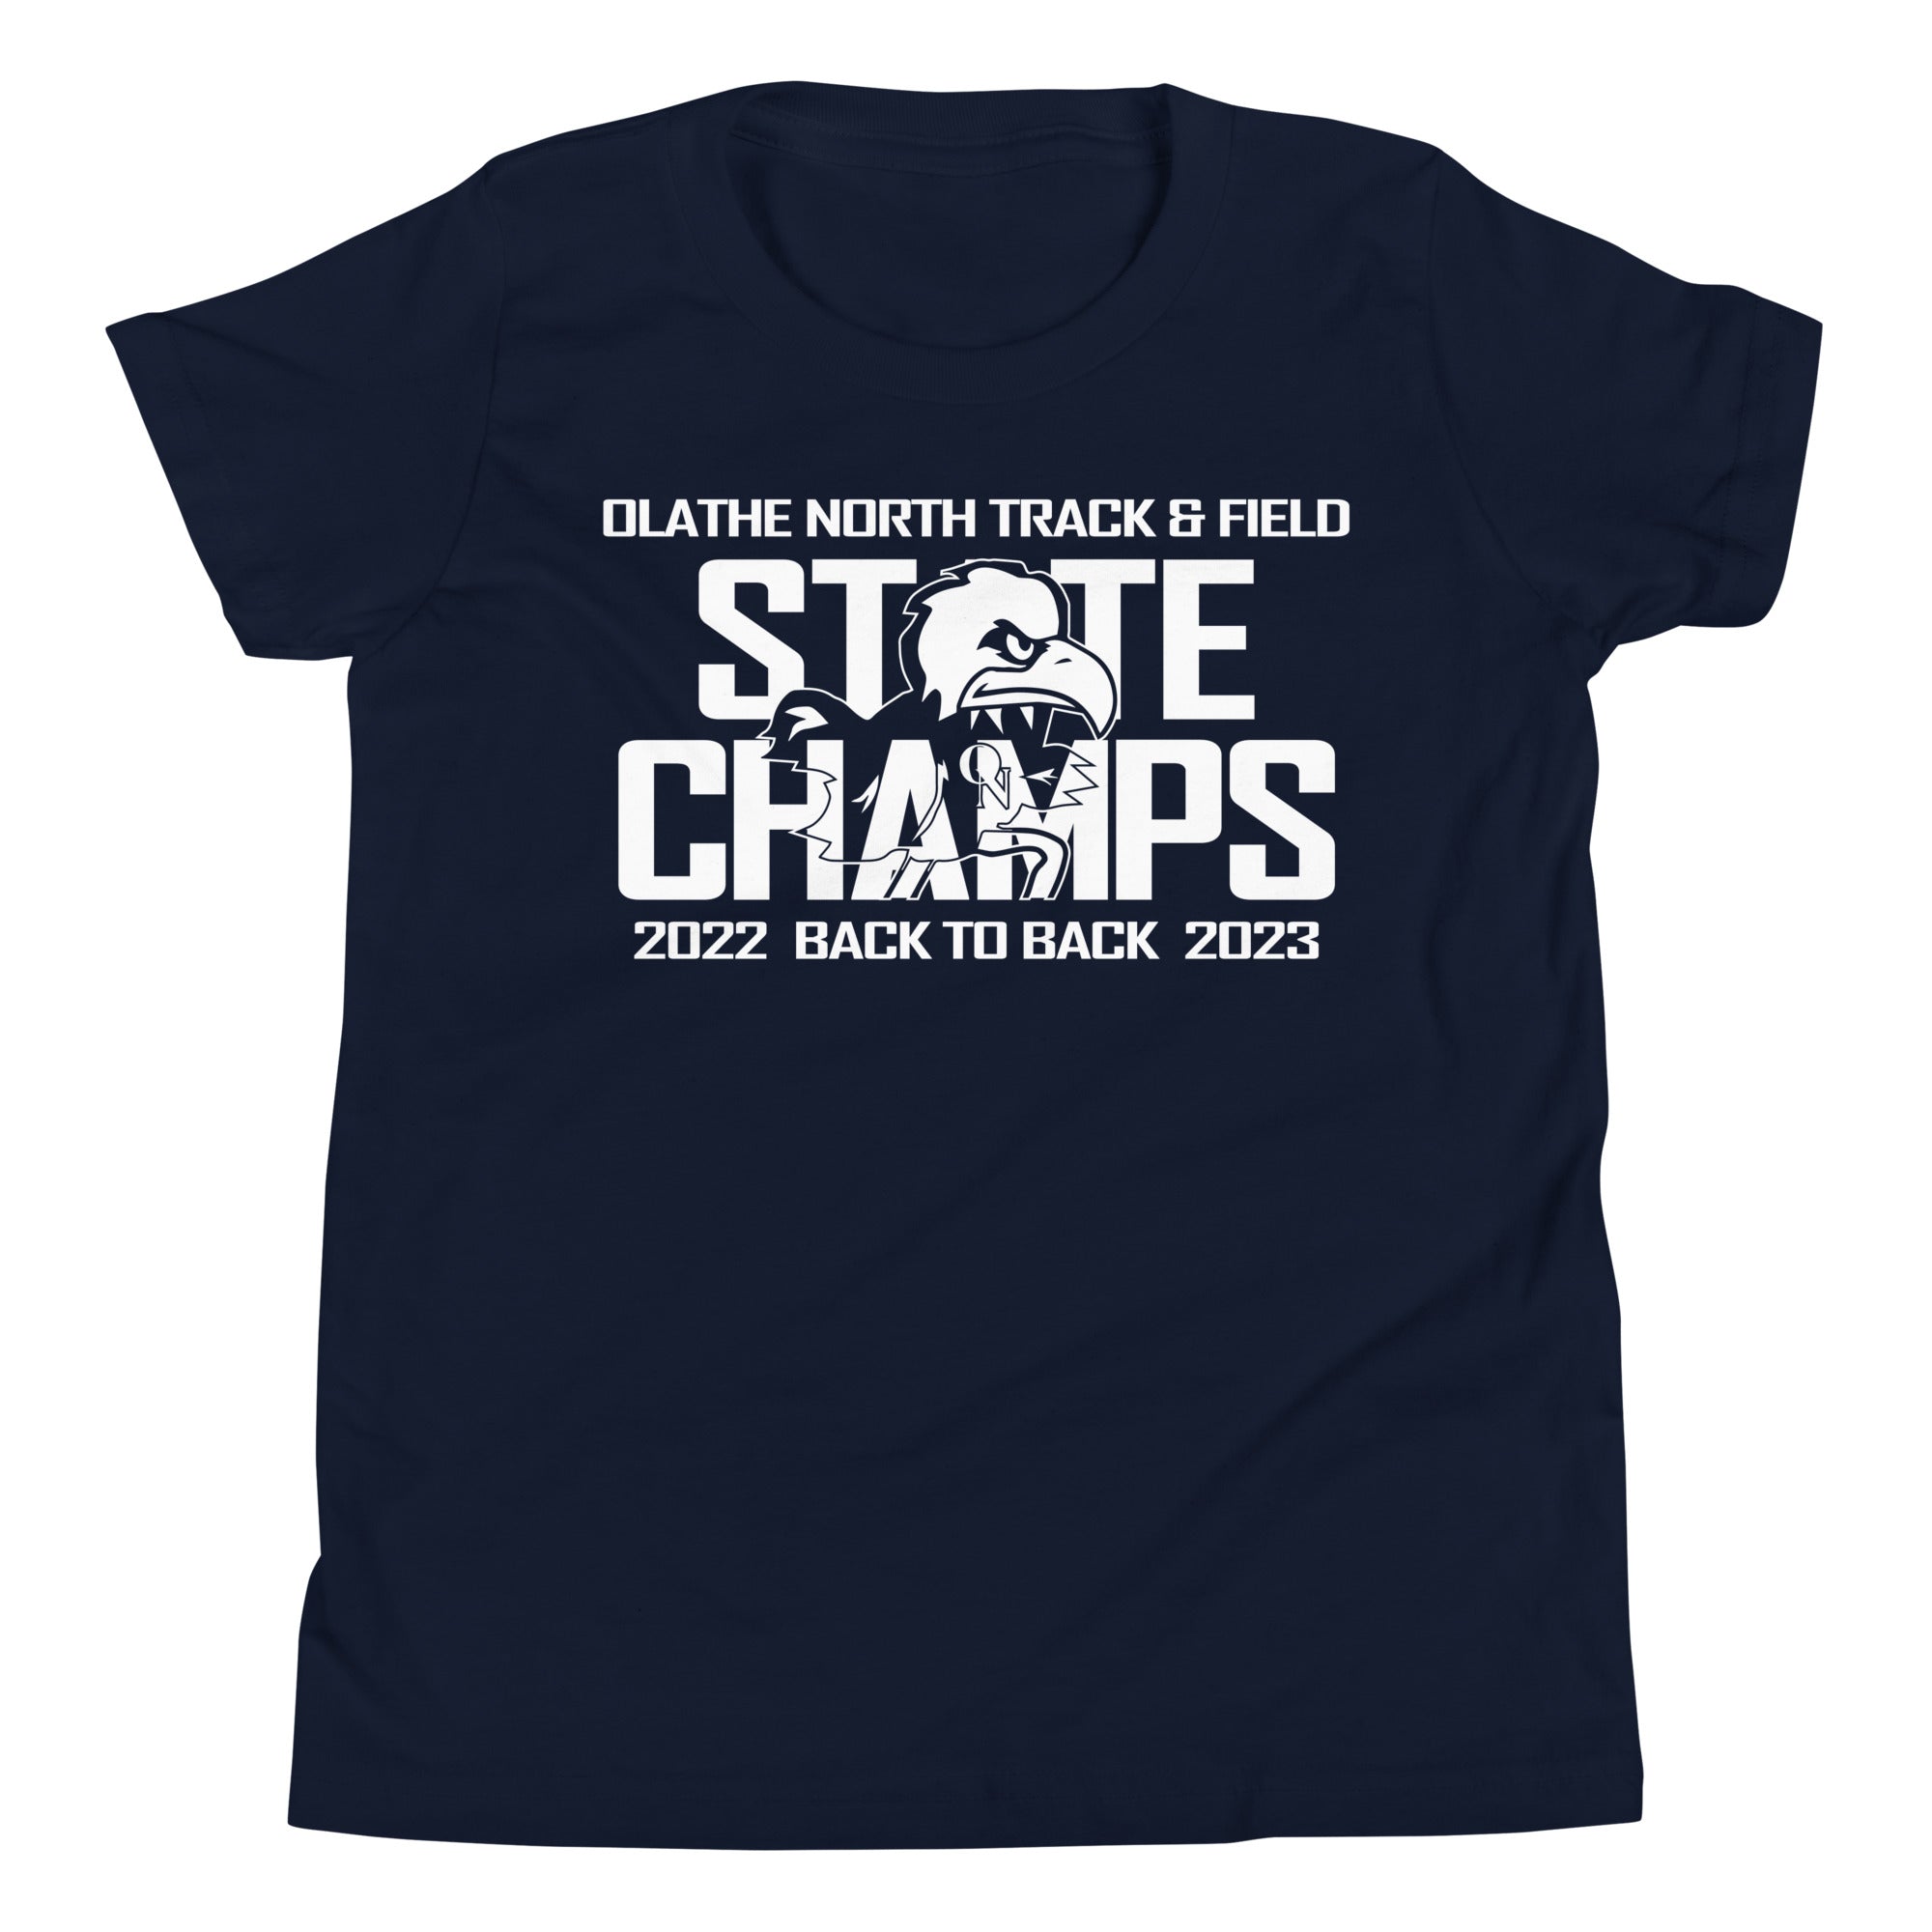 Olathe North Track & Field State Champs Youth Short Sleeve T-Shirt